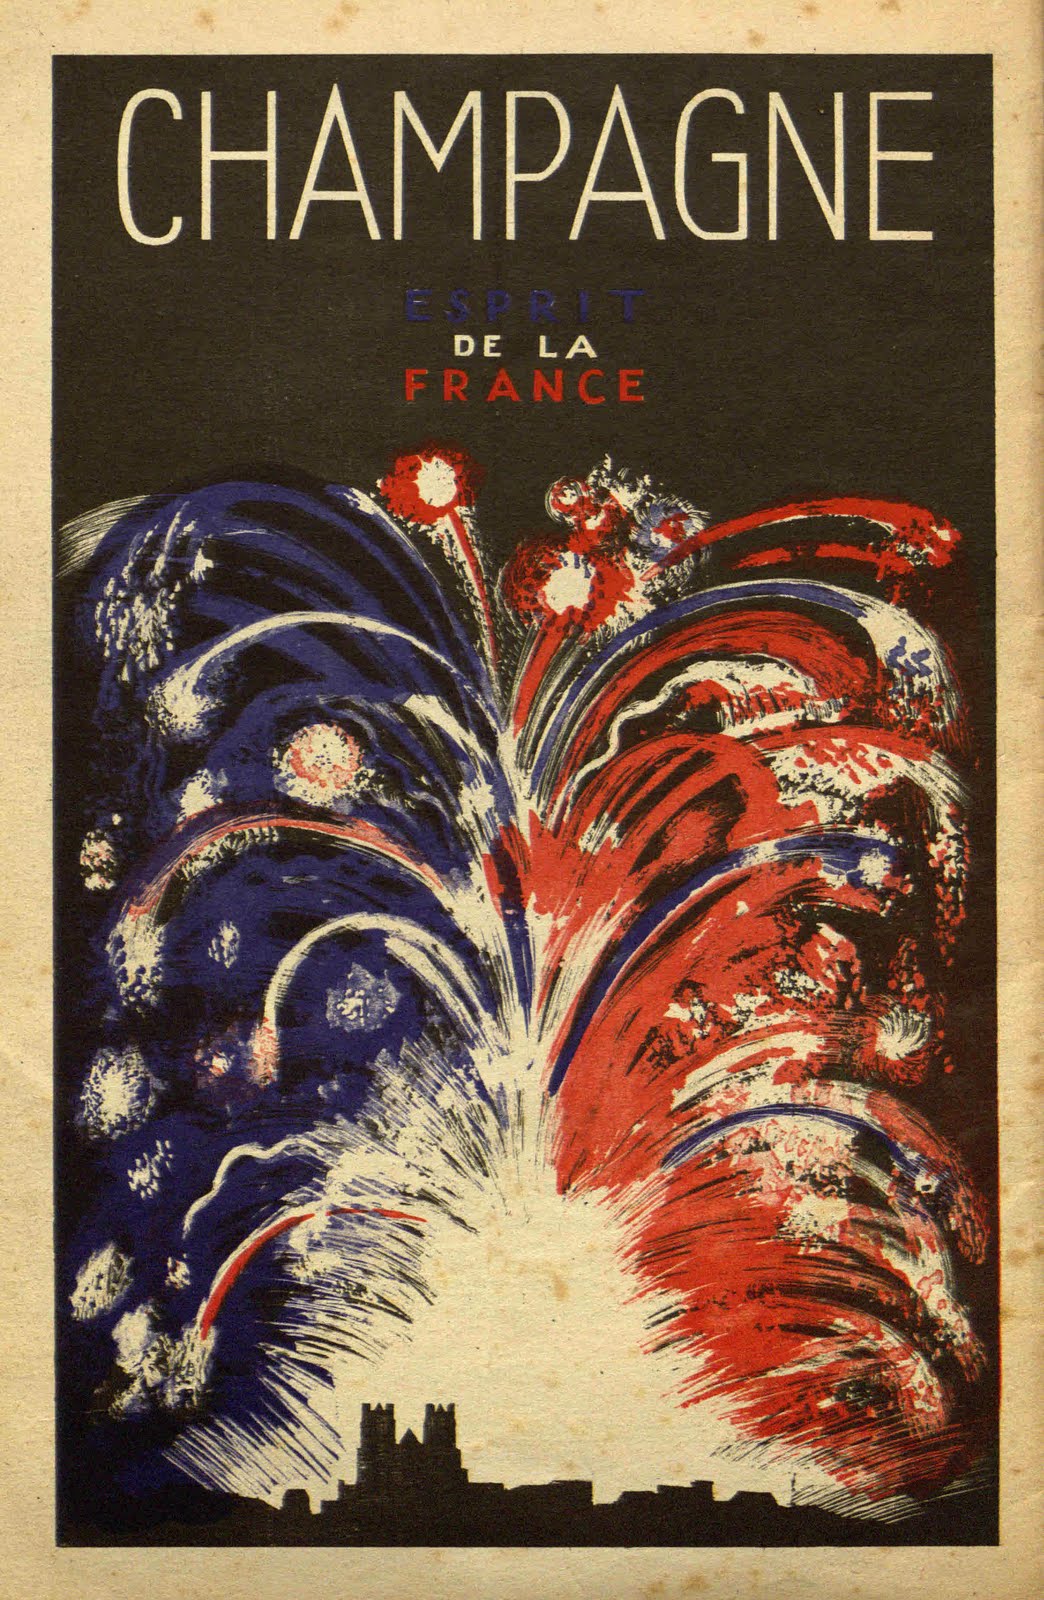 Cover of Le Temoin, Champagne, espirit de la France. Red, white and blue fireworks with cathedral in distance